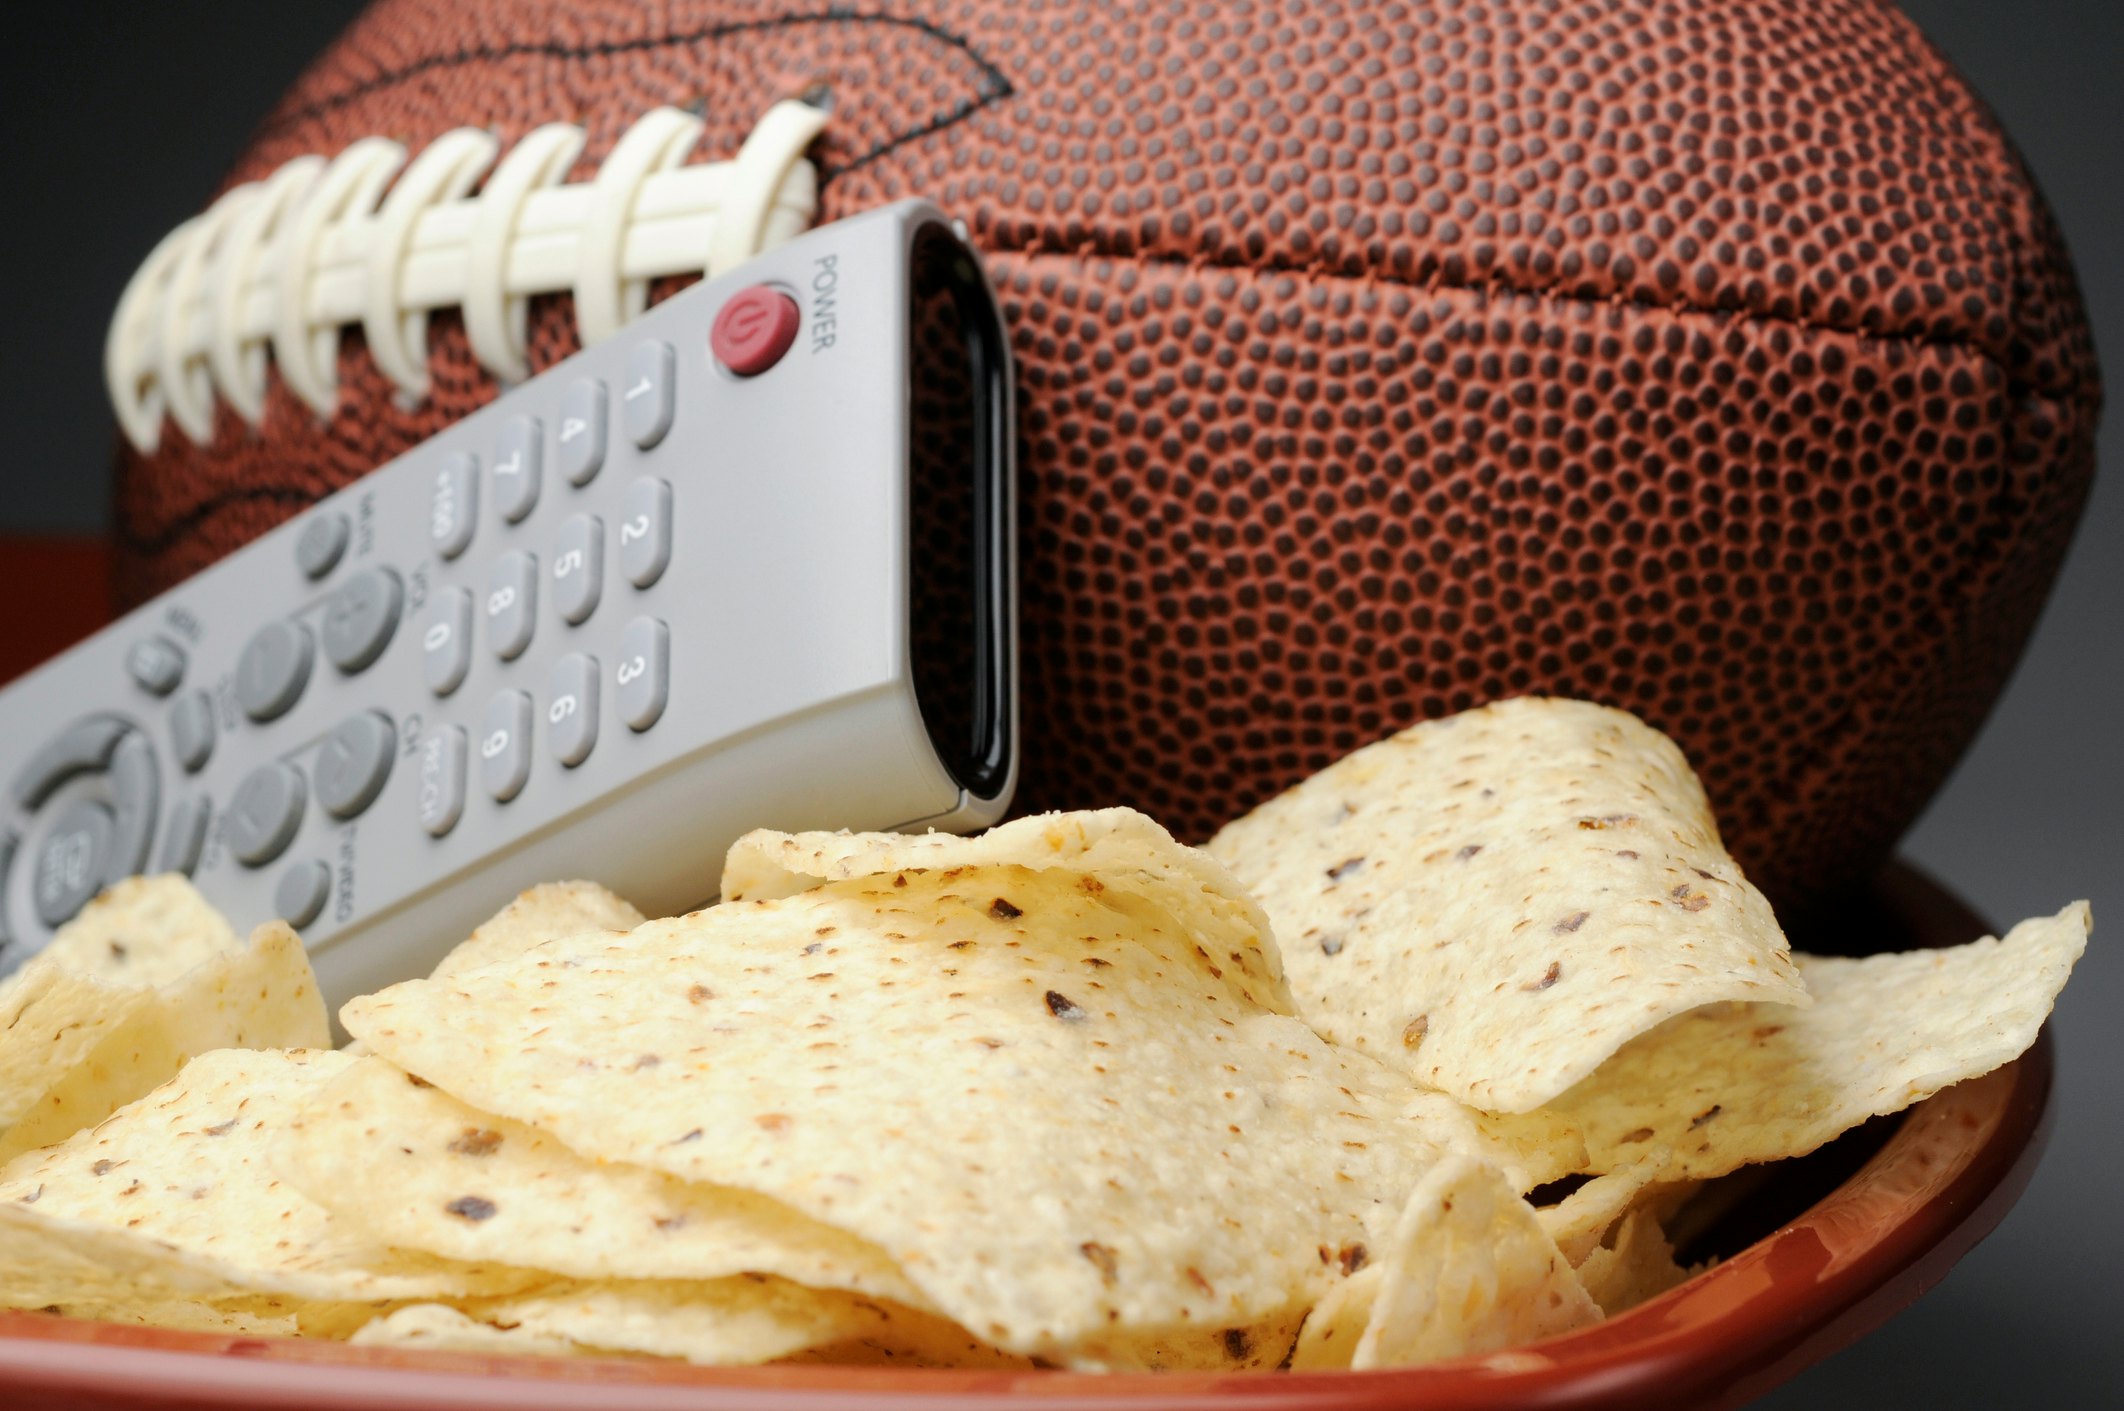 tapped-to-host-the-super-bowl-party-but-dgaf-about-football?-heres-your-guide.